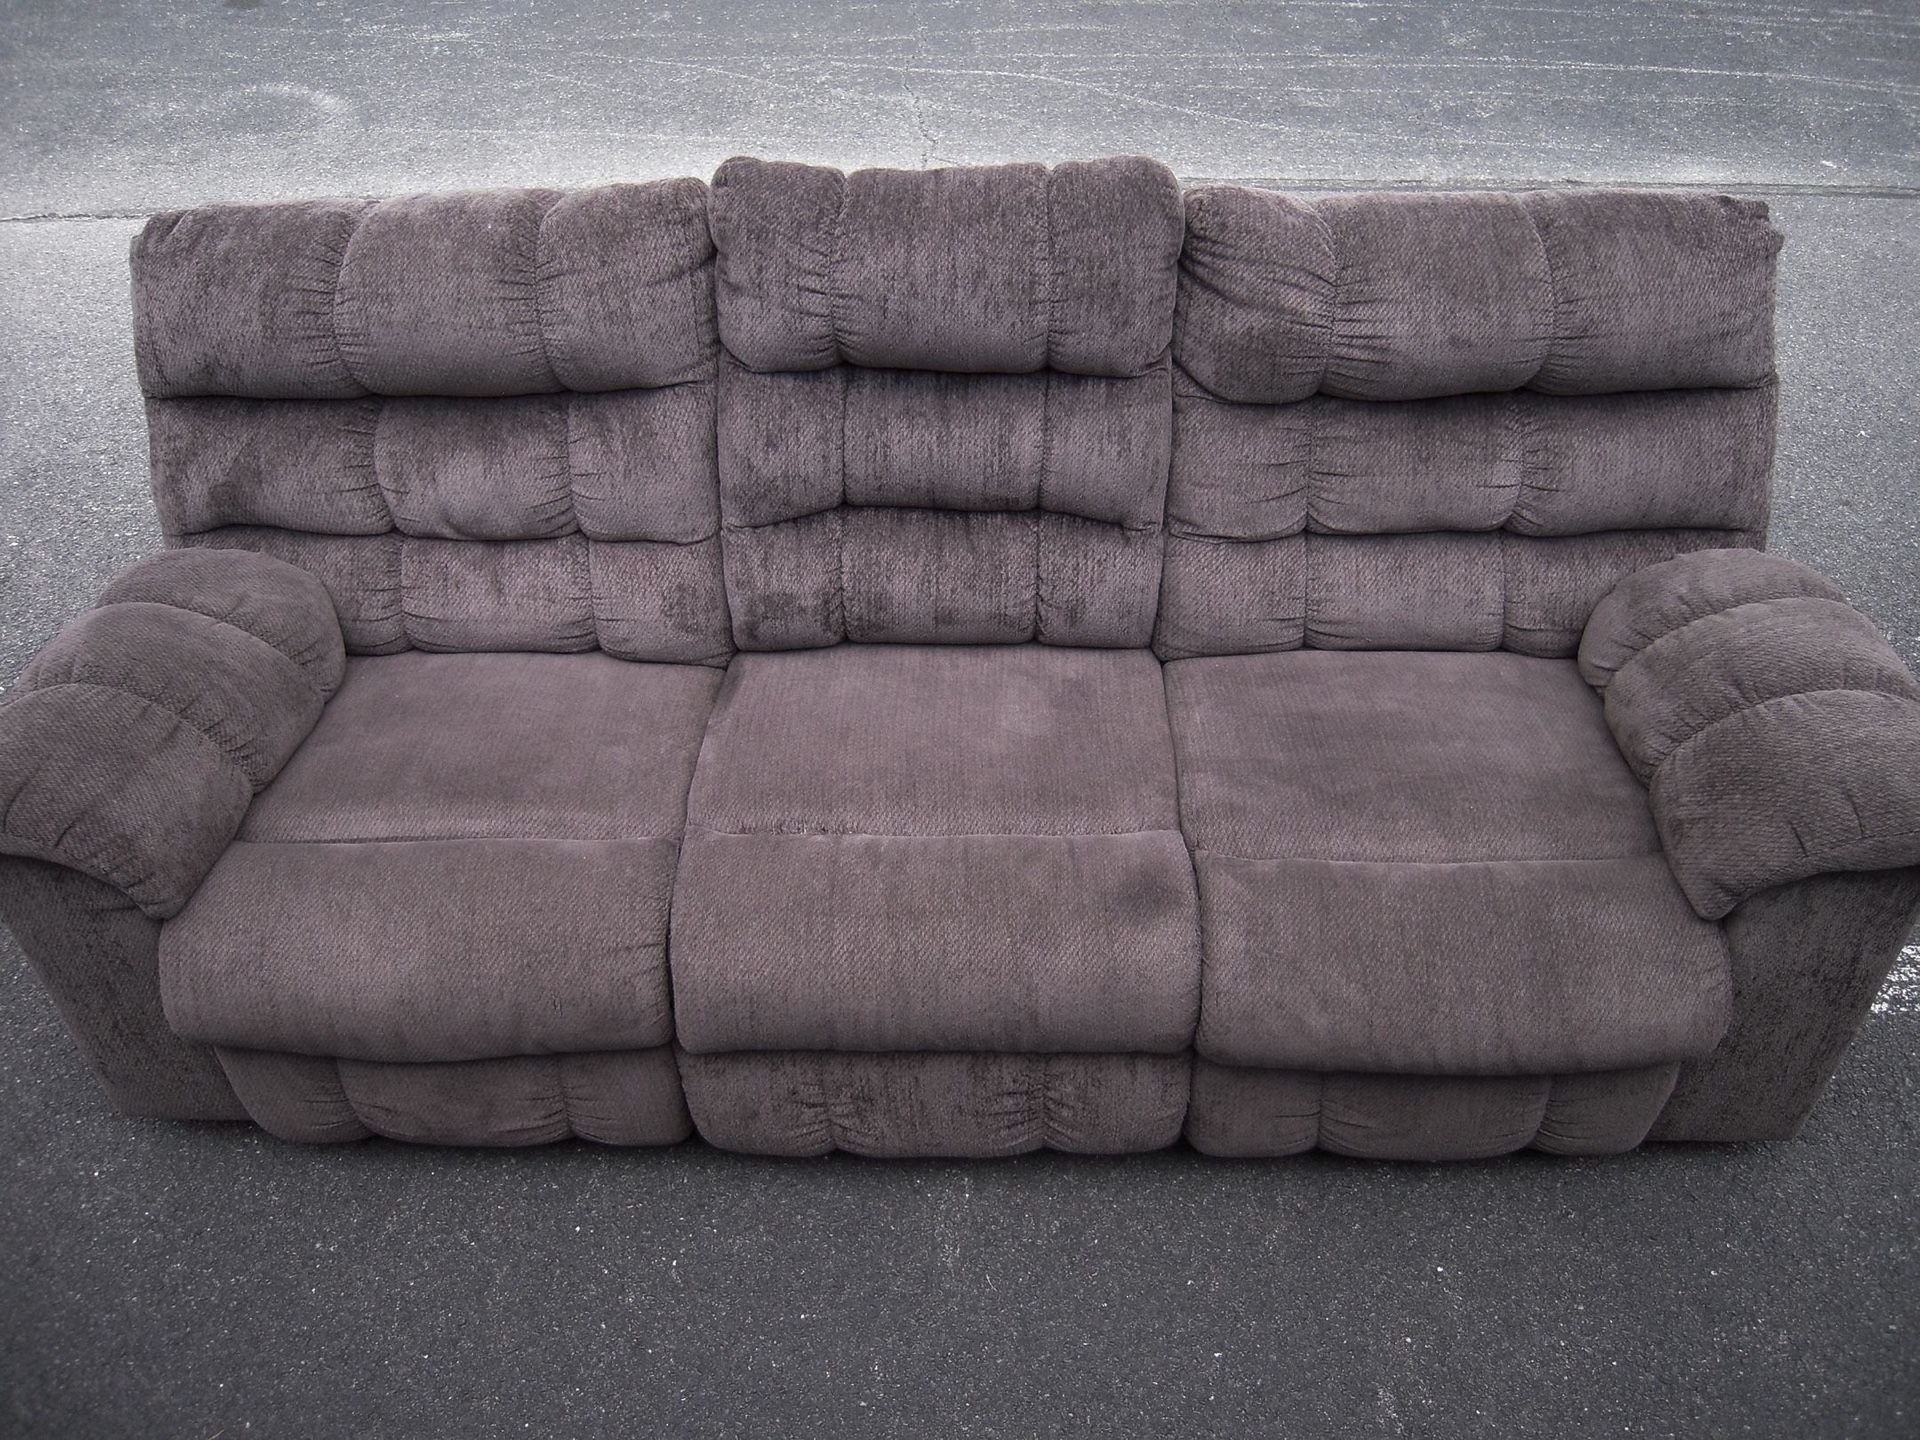 GREAT Double Recliner Sofa/Couch with Cup Holder Storage!